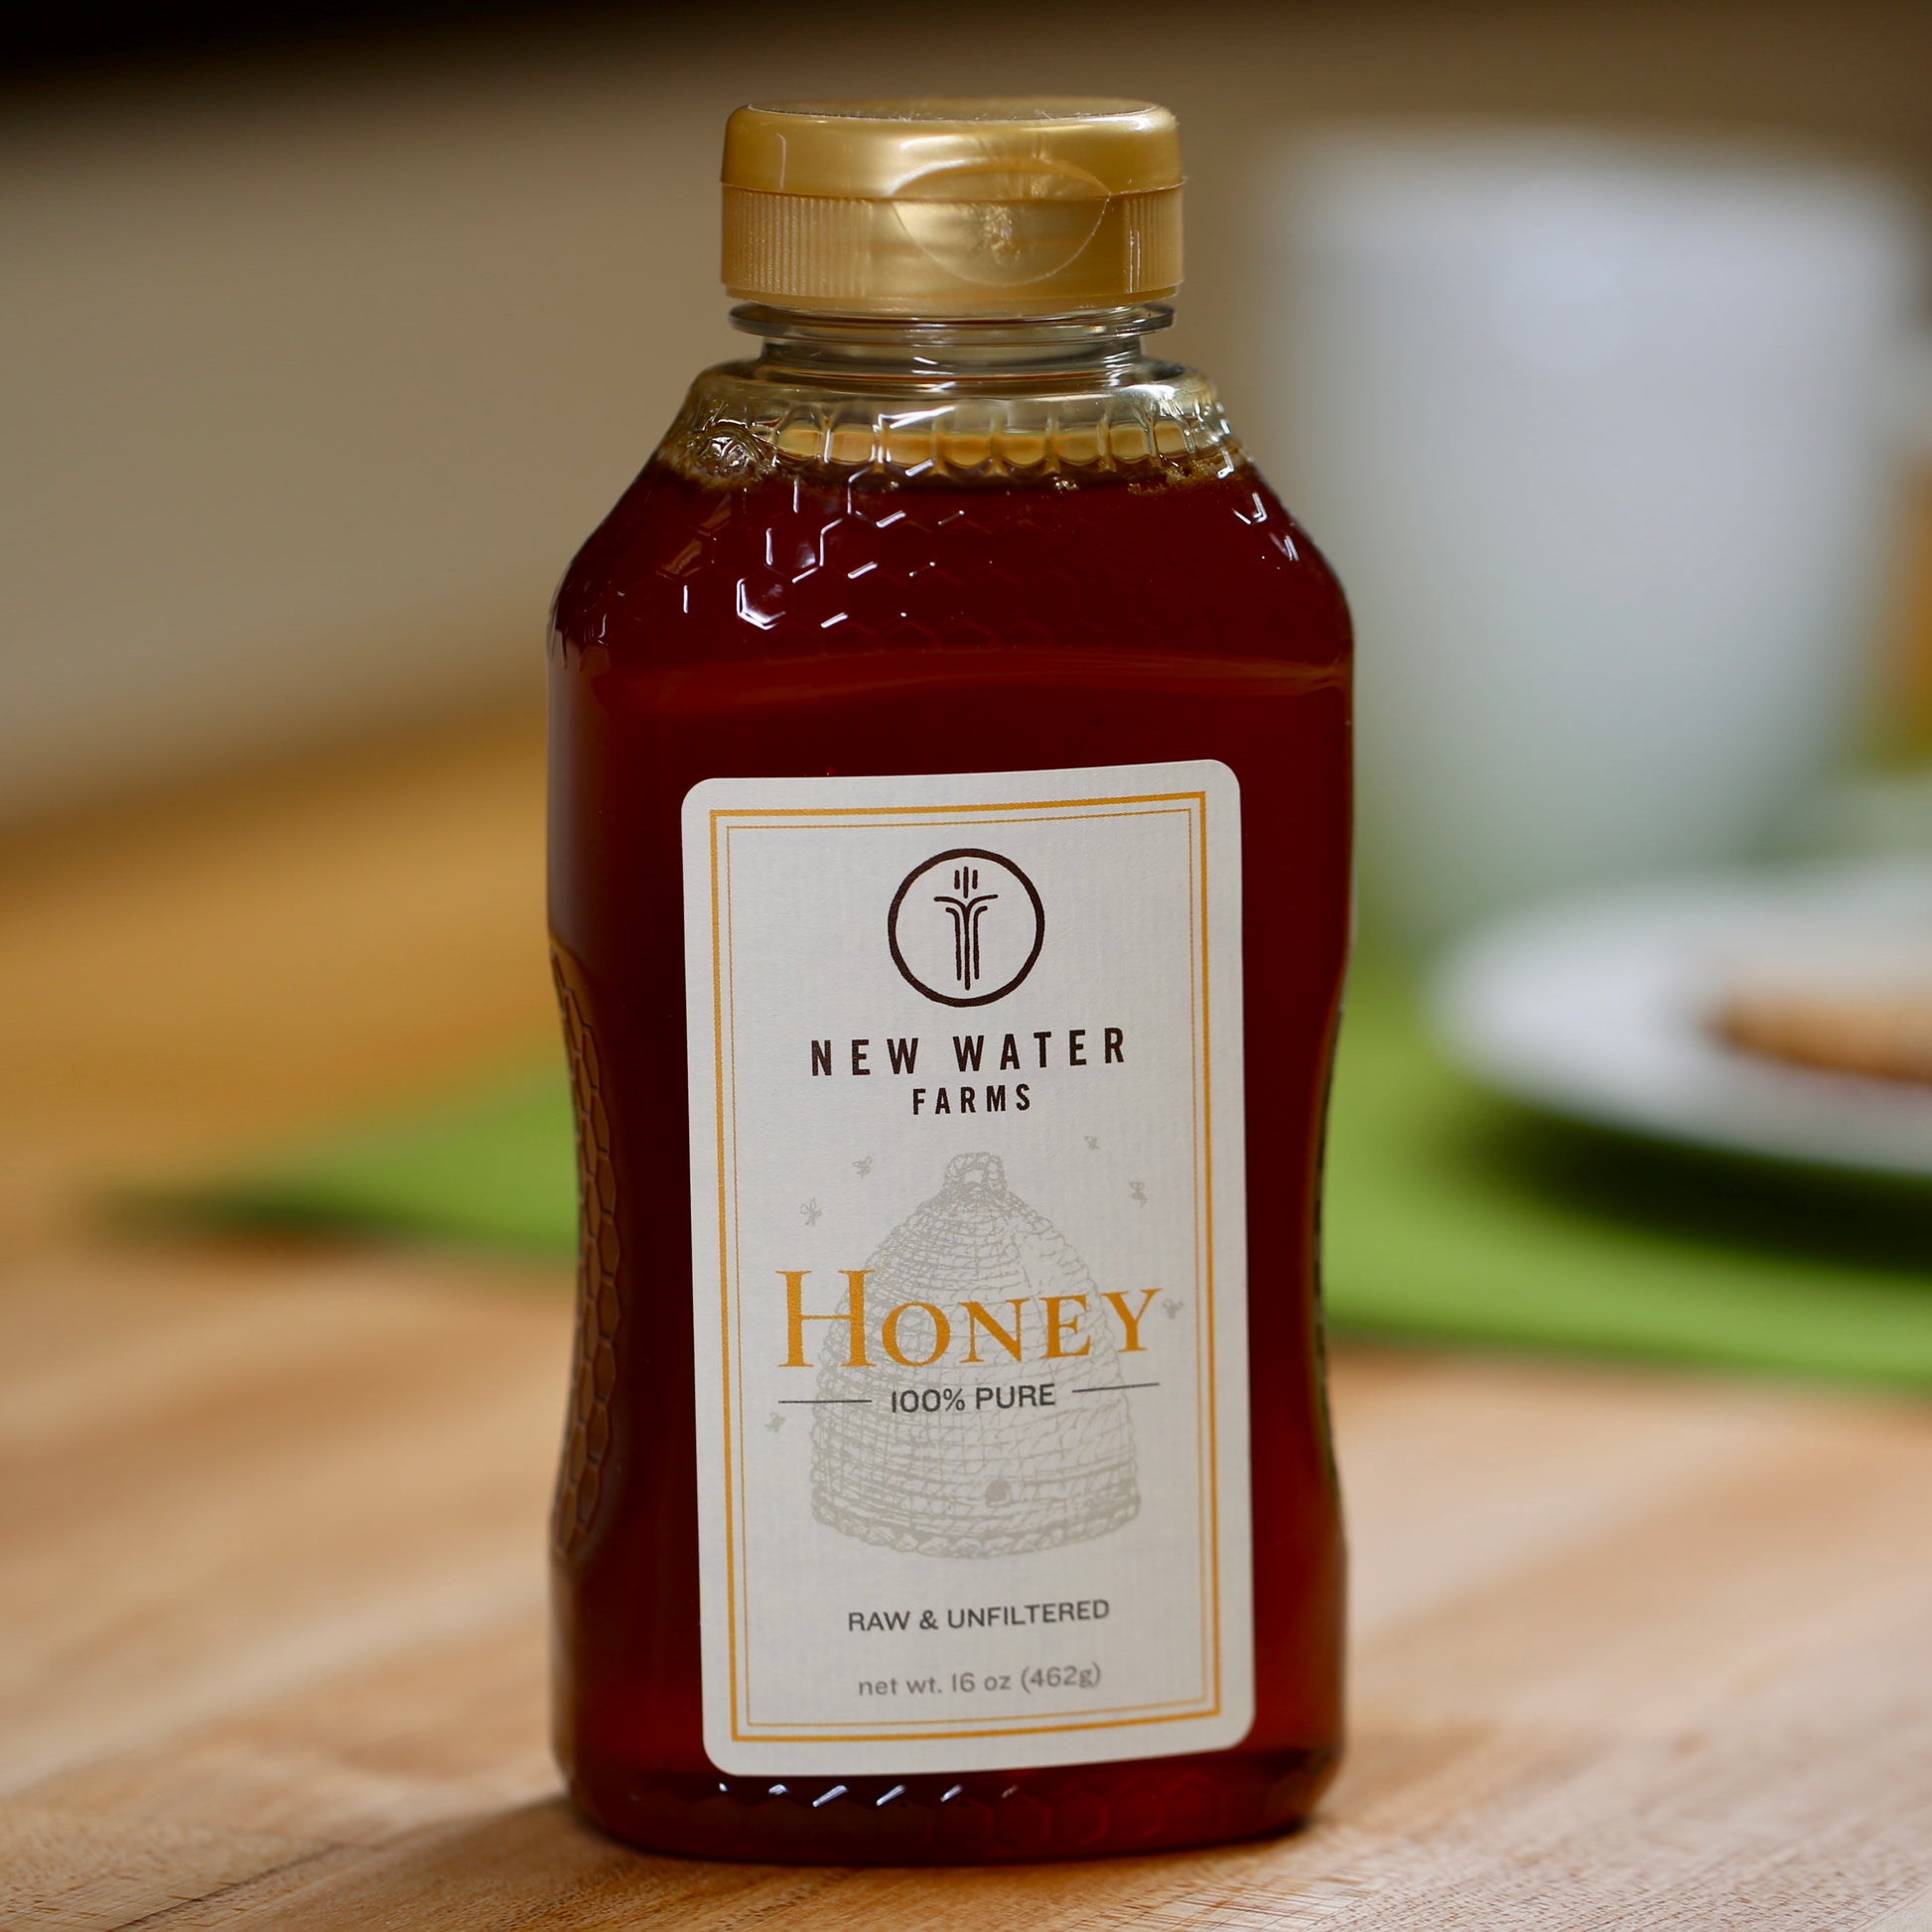 New Water Farms Honey